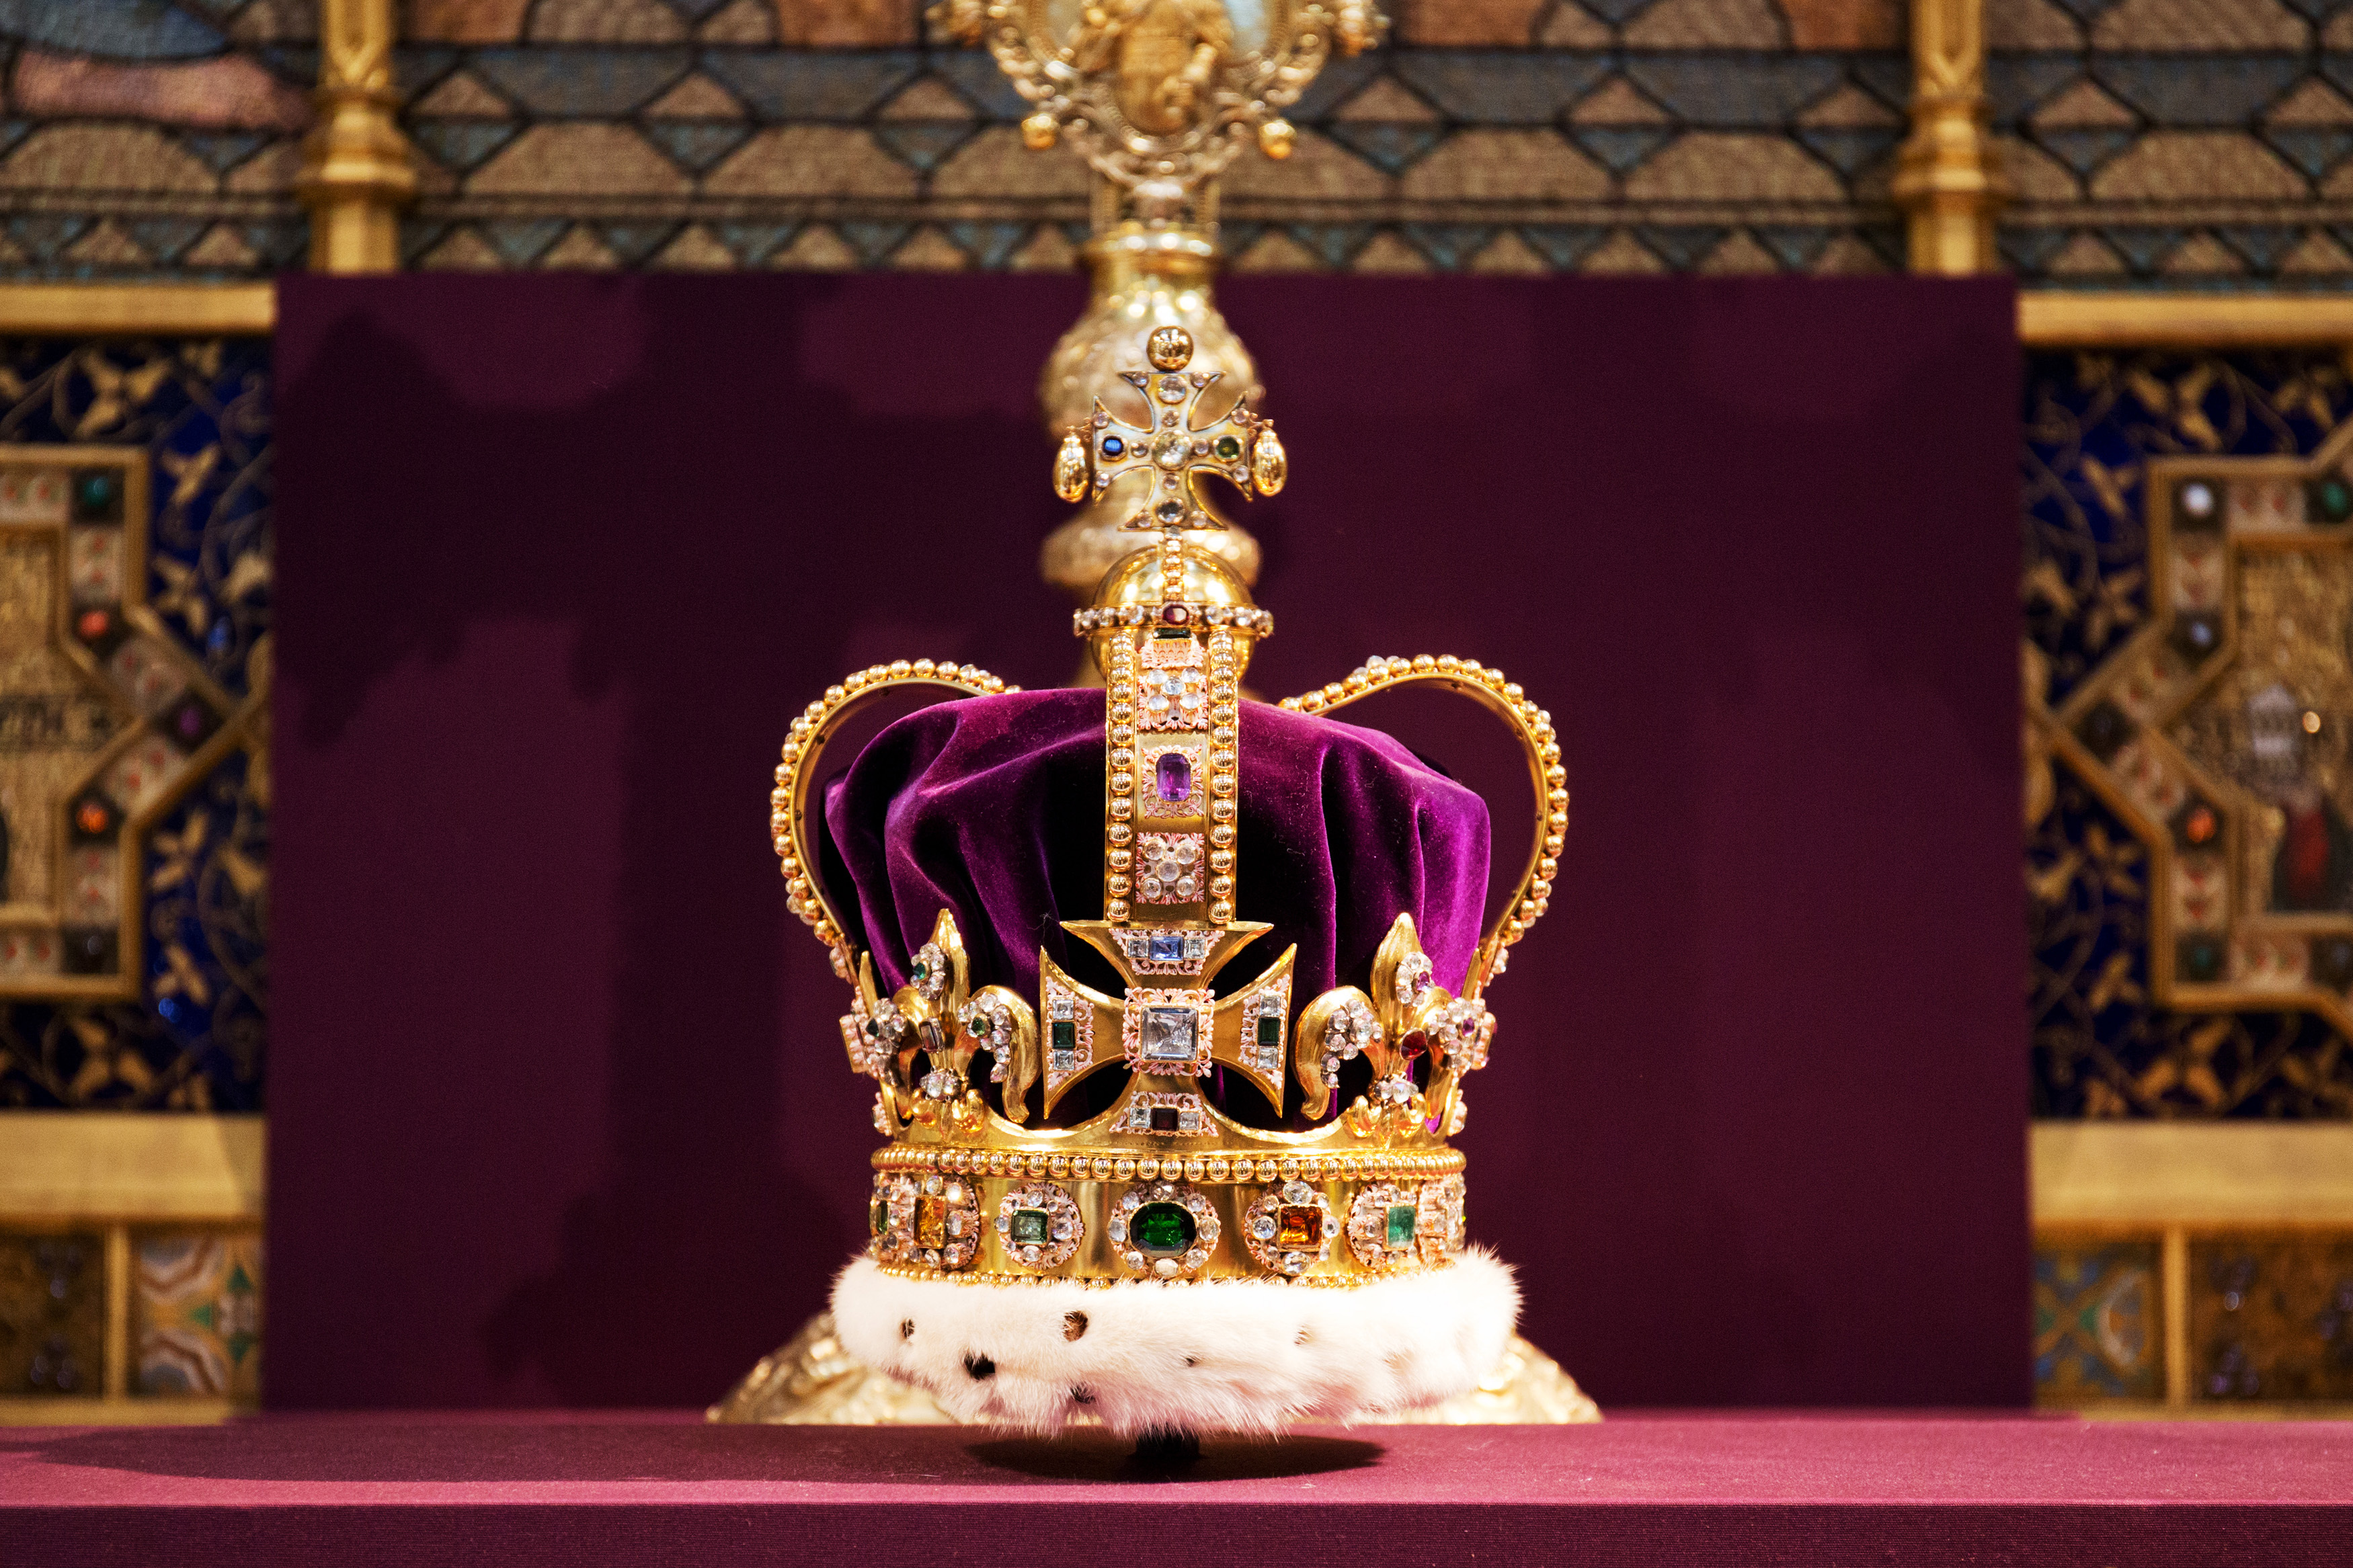 St Edward's Crown, which hasn't been outside the Tower of London for 60 years, is displayed during a service celebrating the 60th anniversary of Queen Elizabeth's coronation at Westminster Abbey in London